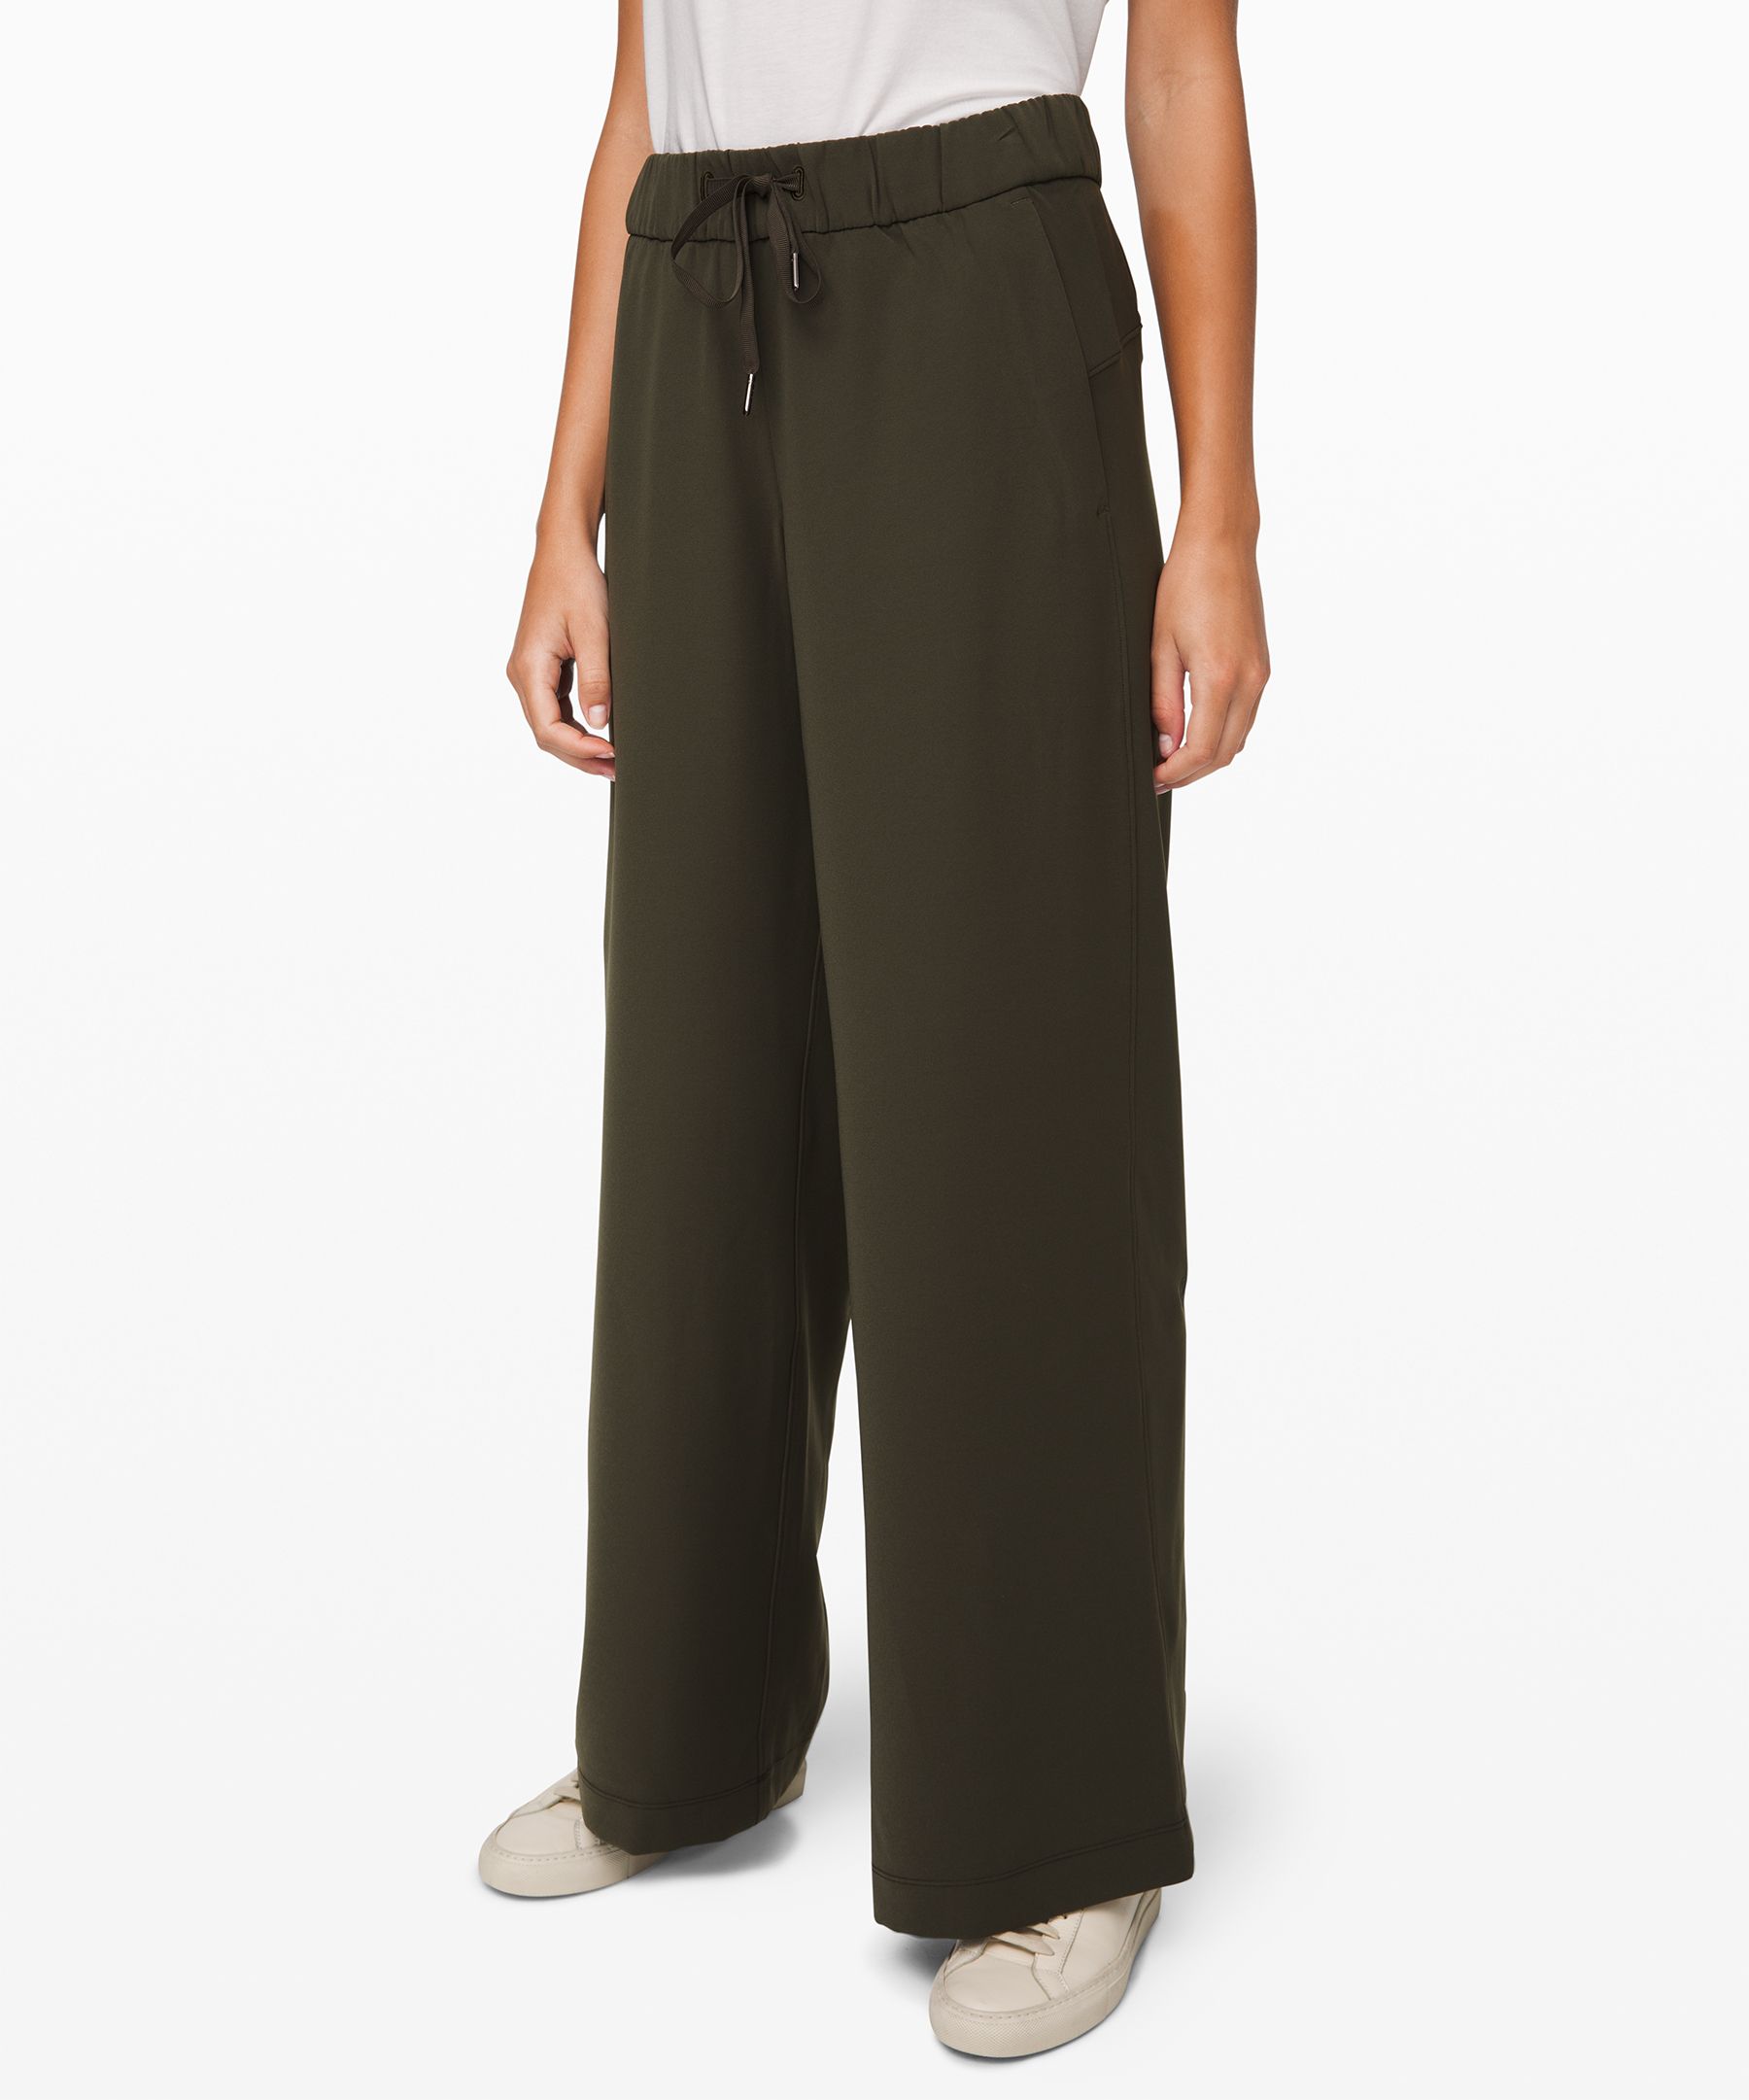 Lululemon + On the Fly Wide-Leg 7/8 Pant Woven